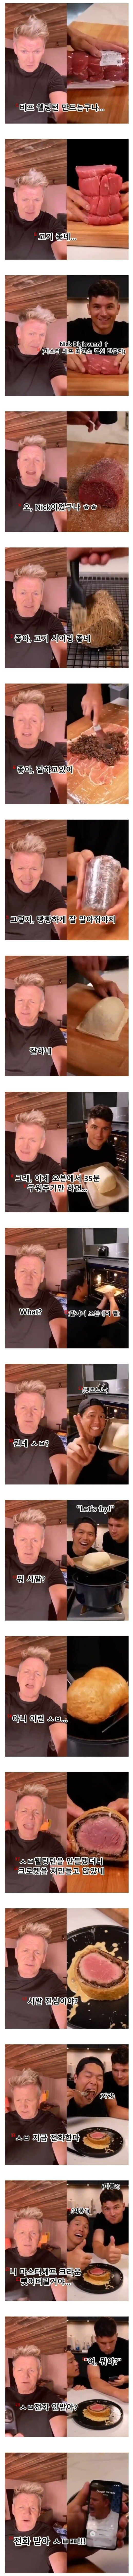 Gordon Ramsay is the most angry person watching